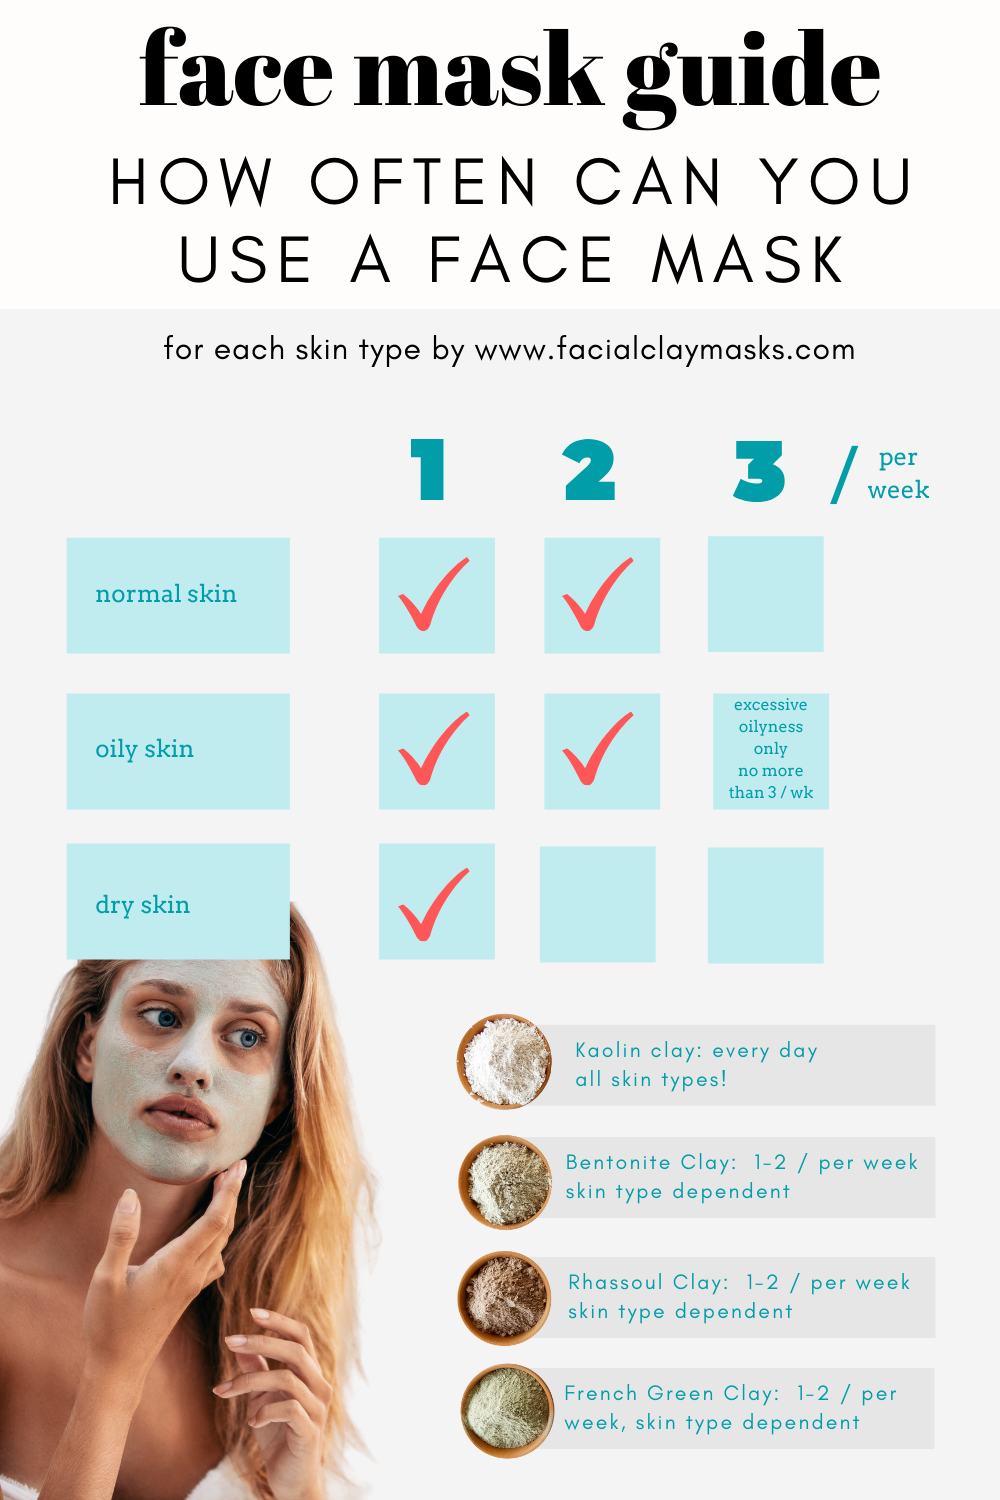 Can you use a clay mask everyday? 2